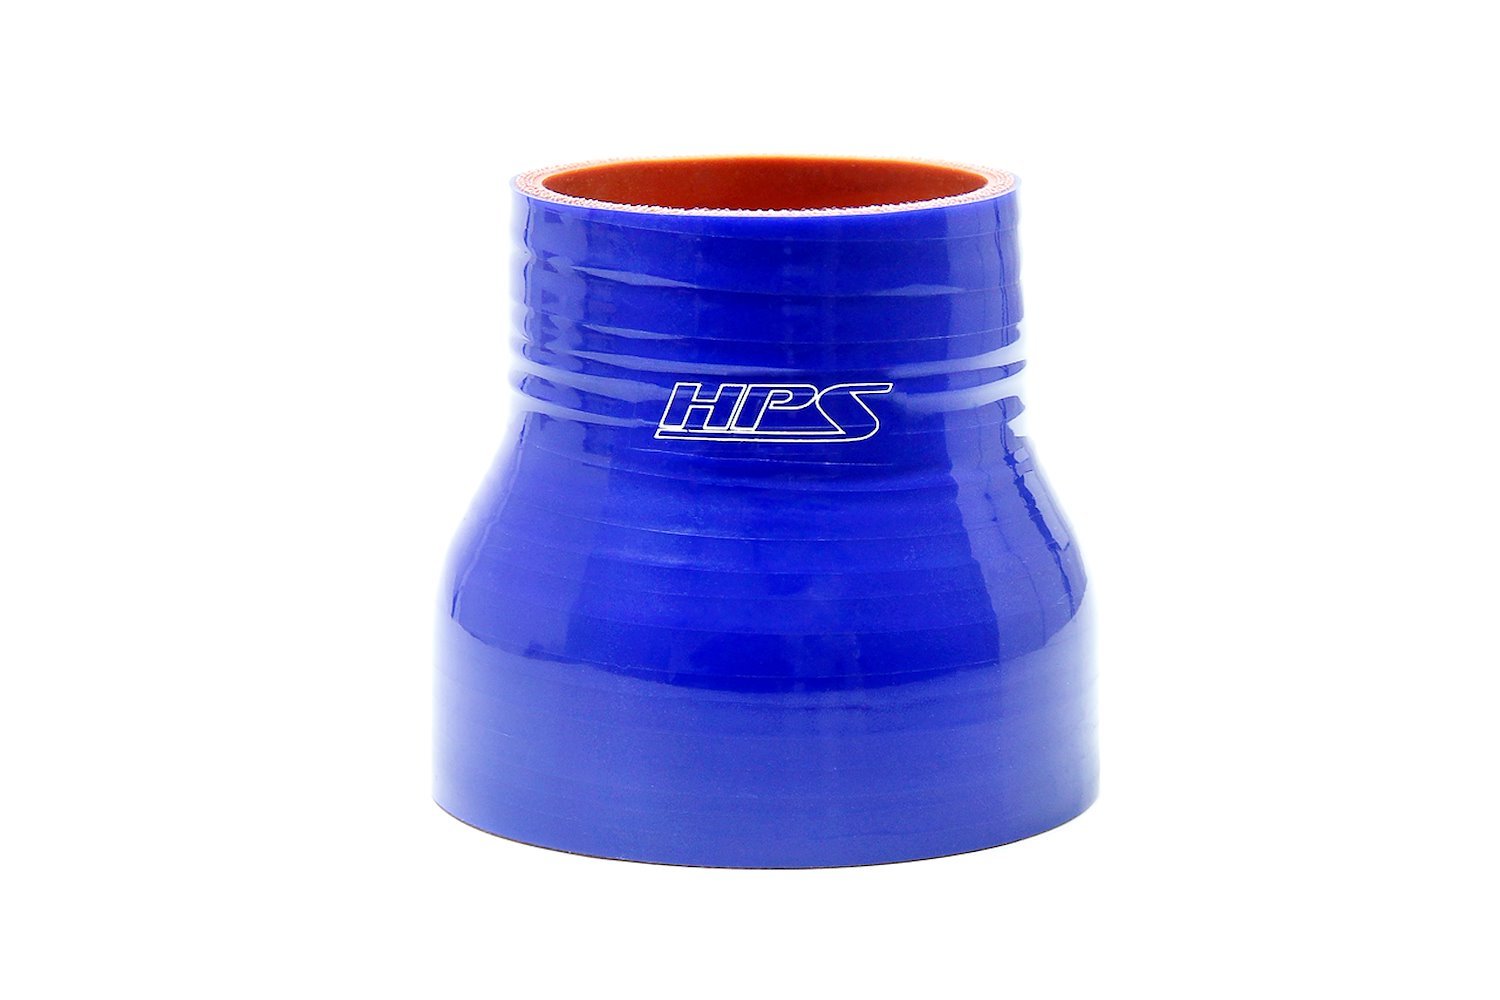 HTSR-225-268-L4-BLUE Silicone Reducer Hose, High-Temp Reinforced, 2-1/4 in. - 2-11/16 in. ID, 4 in. Long, Blue